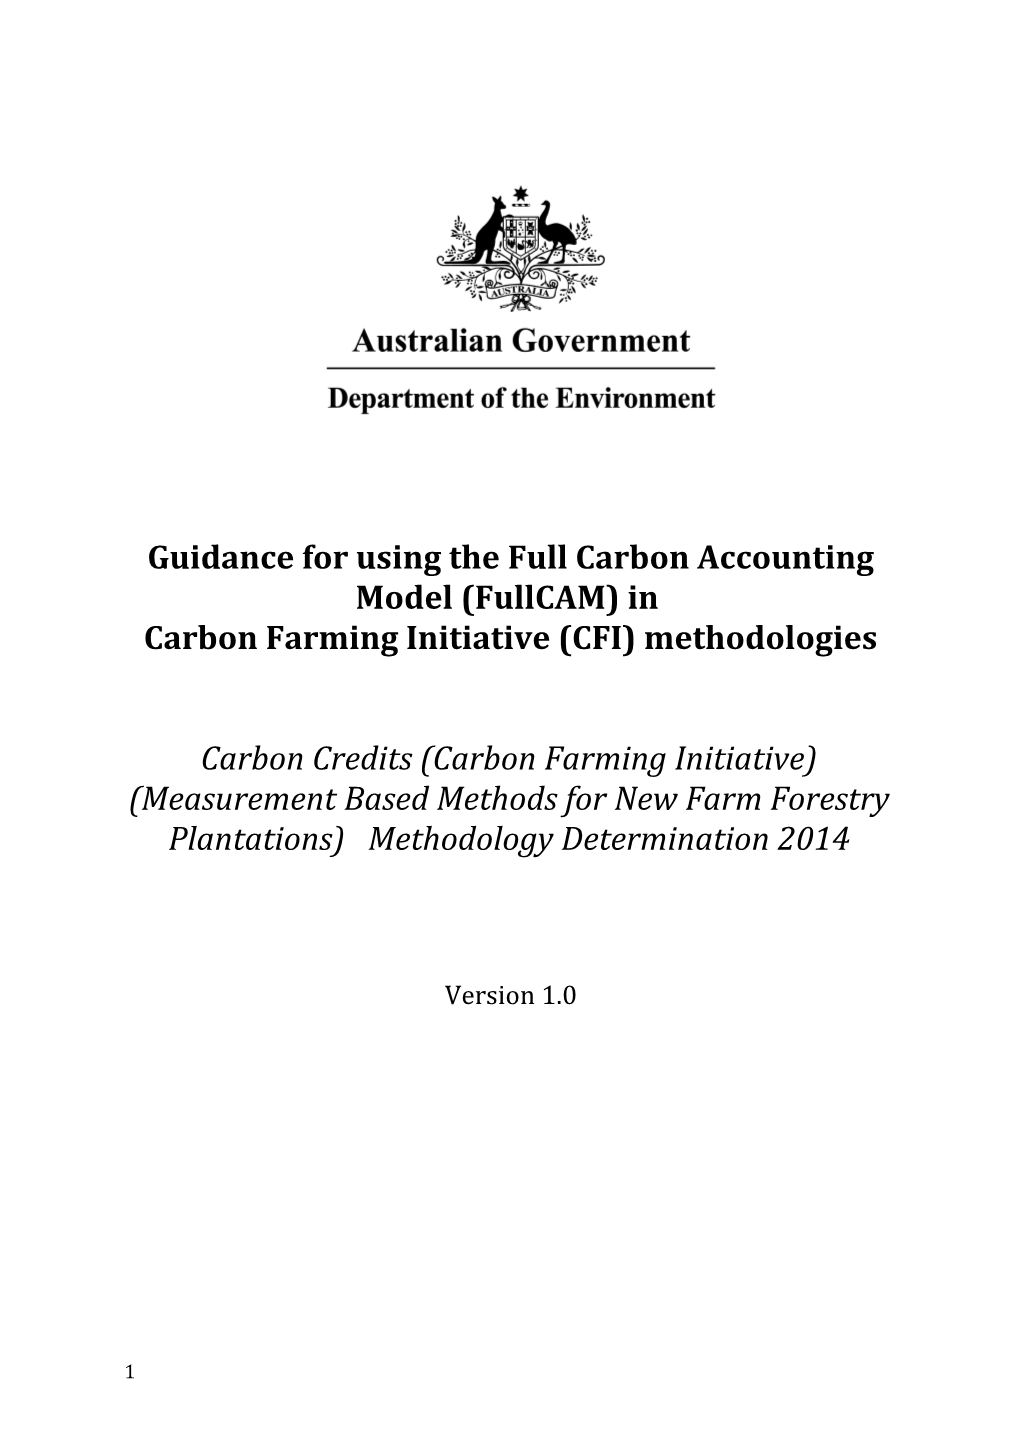 Guidance for Using the Full Carbon Accounting Model (Fullcam) in Carbon Farming Initiative